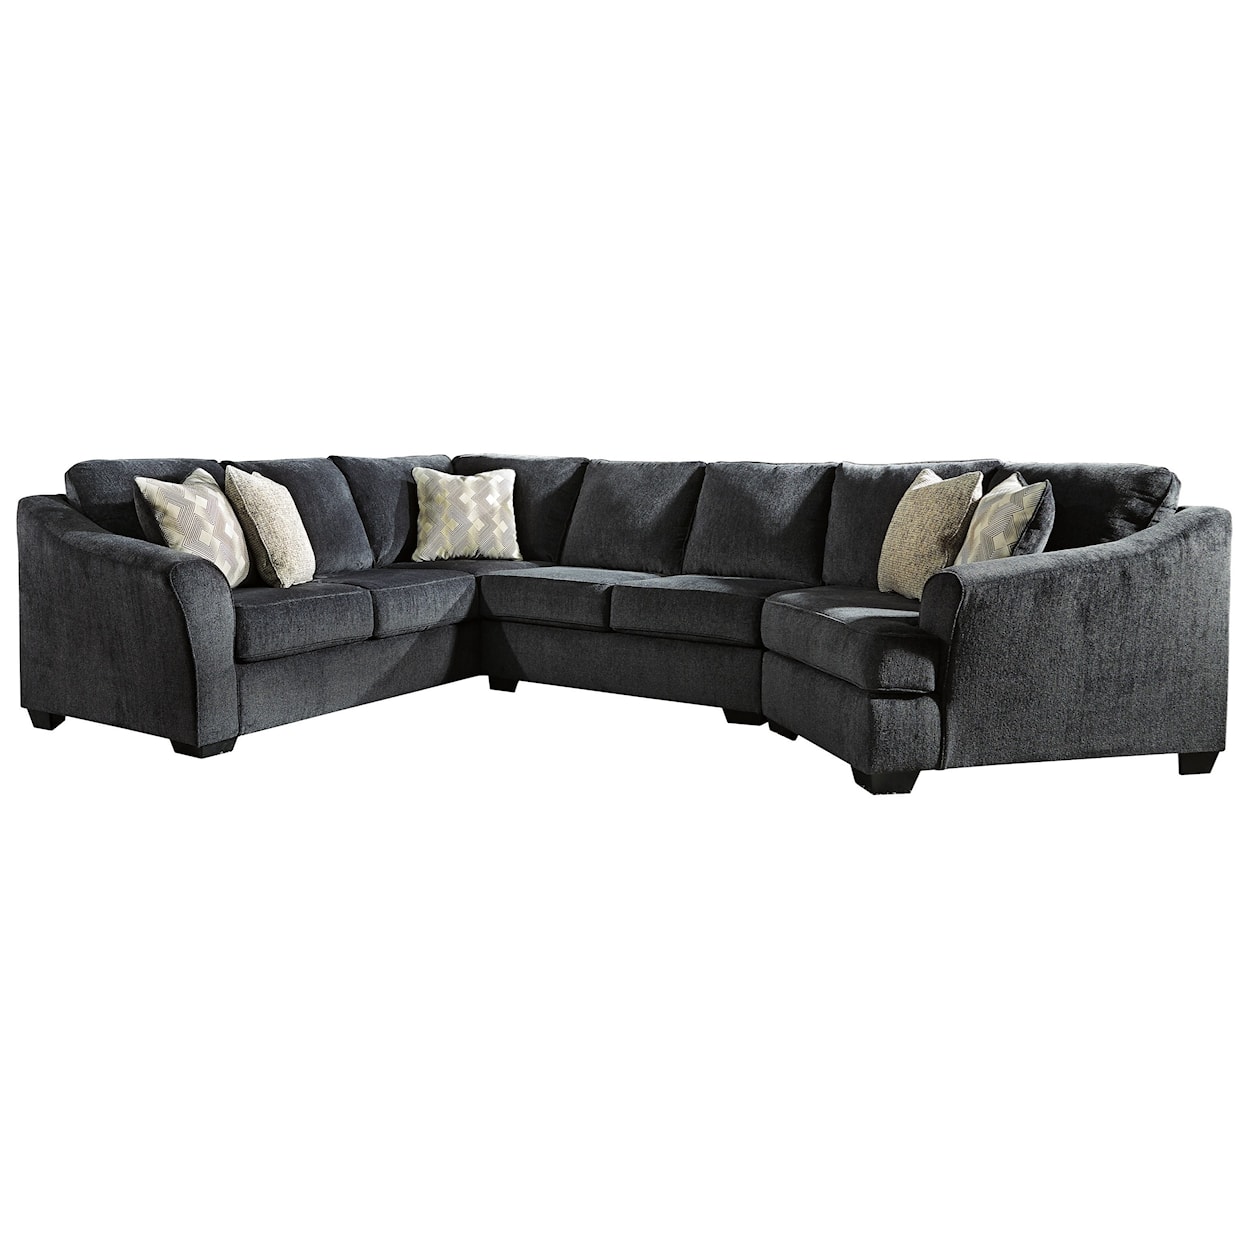 Ashley Furniture Signature Design Eltmann 3-Piece Sectional with Right Cuddler